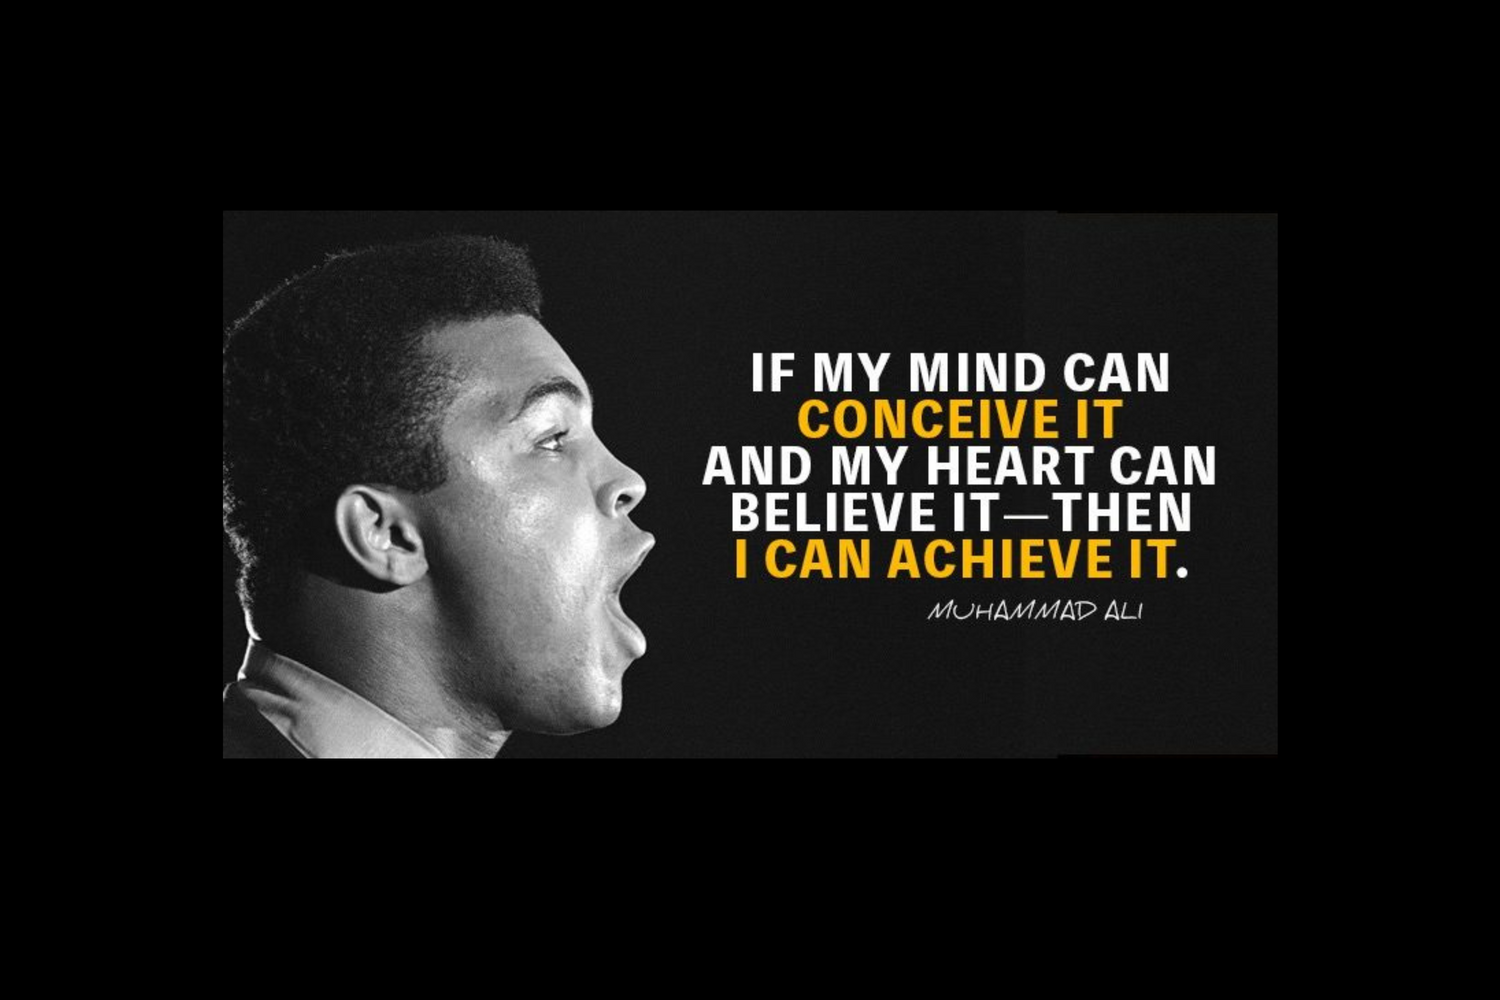 Muhammad Ali (/ɑːˈliː/;[3] born Cassius Marcellus Clay Jr.;[4] January 17, 1942 – June 3, 2016) was an American professional boxer and activist. Nicknamed "The Greatest", he is regarded as one of the most significant sports figures of the 20th century, and is frequently ranked as the greatest heavyweight boxer of all time.[5][6][7] In 1999, he was named Sportsman of the Century by Sports Illustrated and the Sports Personality of the Century by the BBC.